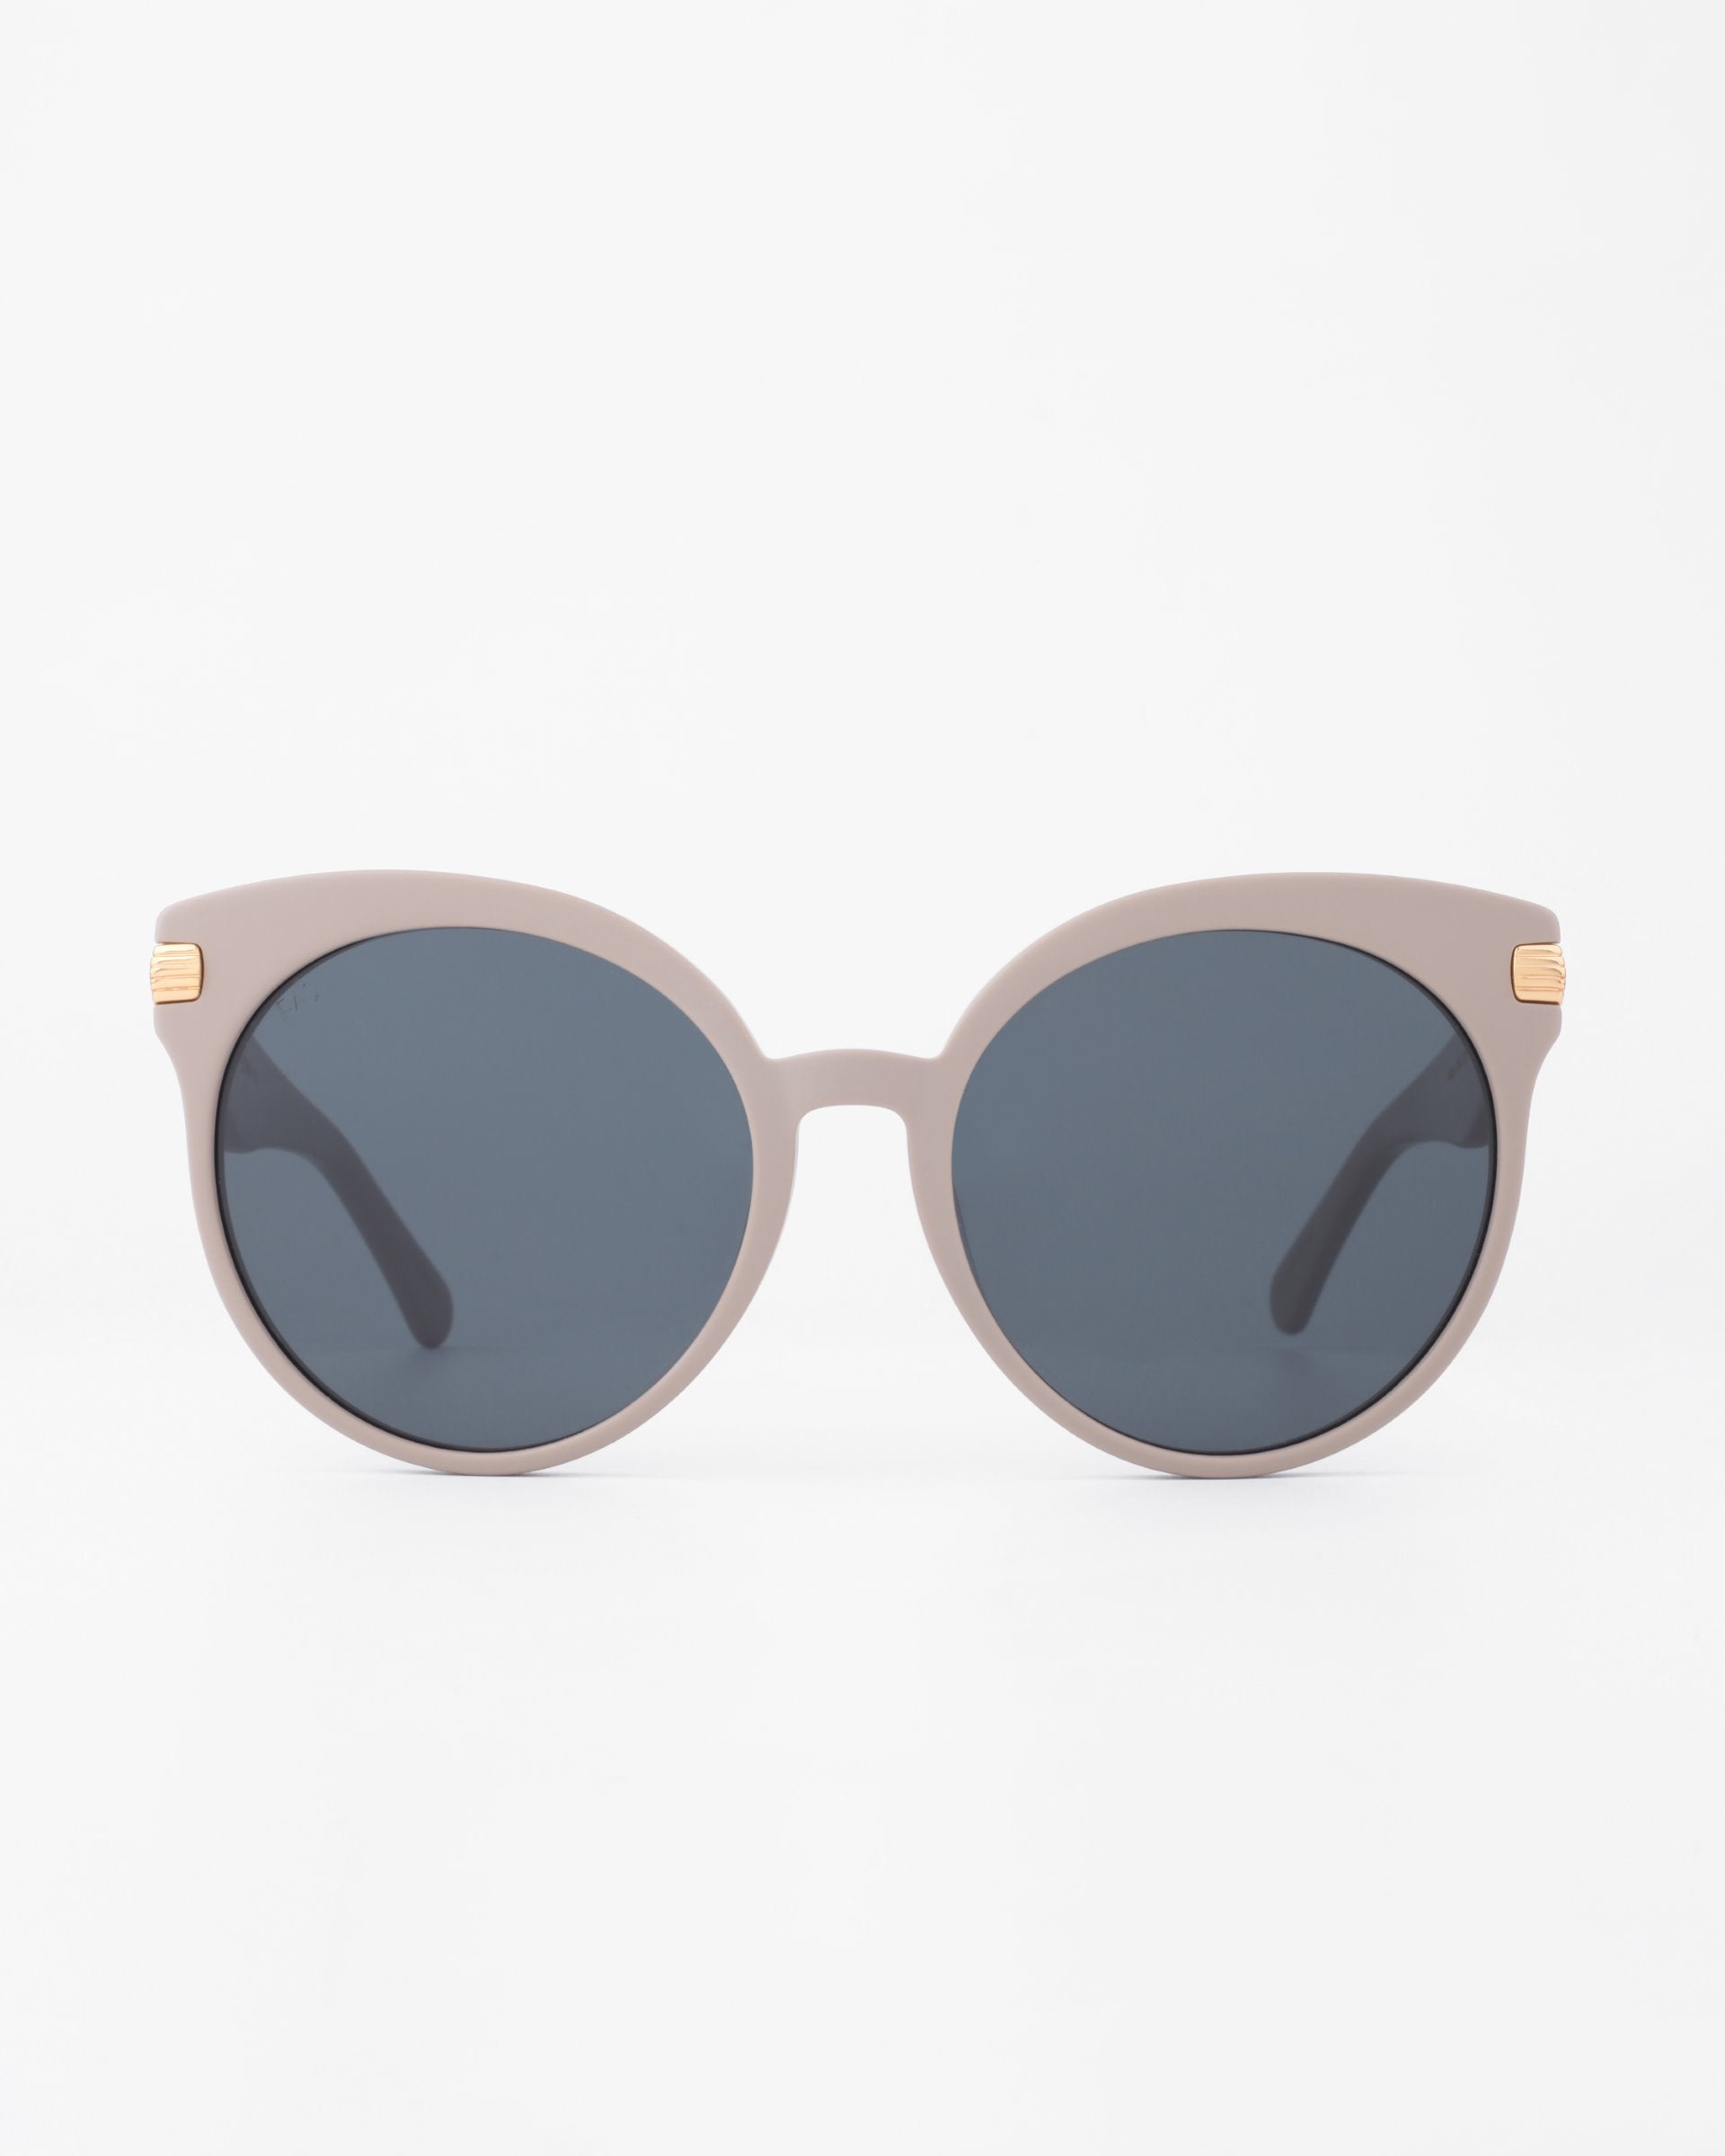 A pair of round, oversized Muse sunglasses with beige frames and dark-tinted, shatter-resistant nylon lenses from For Art's Sake®. The handmade plant-based acetate frames have 18-karat gold-plated accents on the temples. The sunglasses are set against a plain white background.